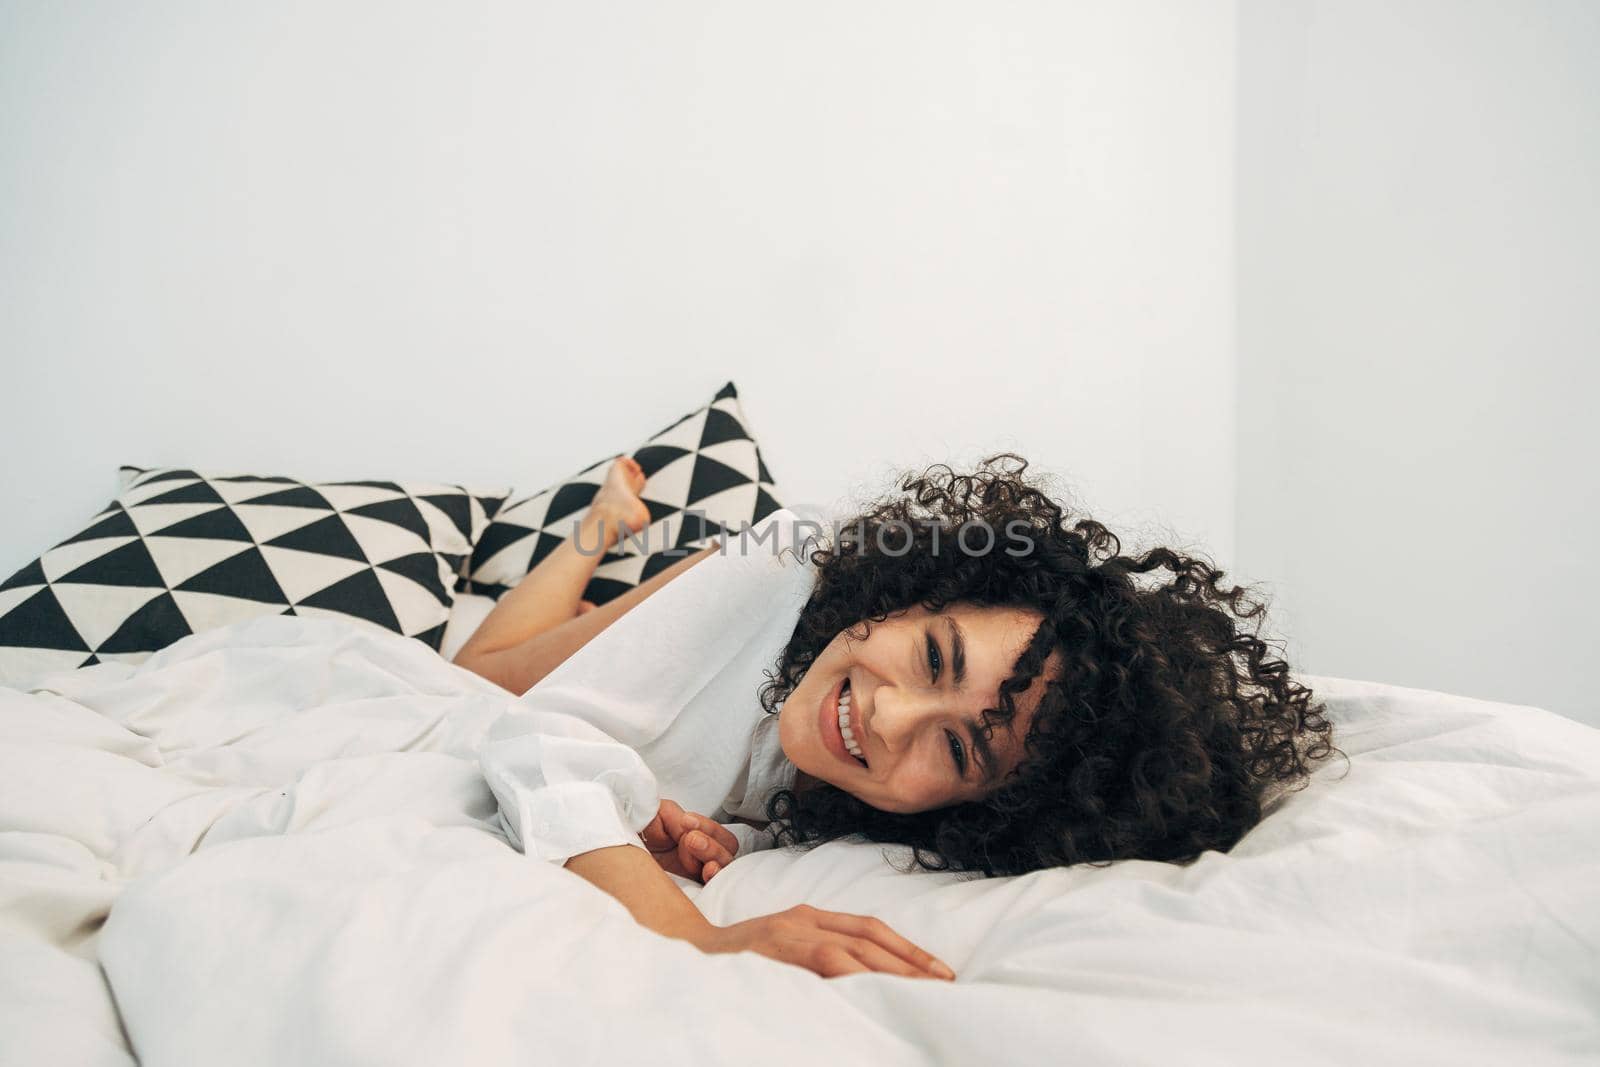 Smiling playful mixed race woman lying on bed looking at camera. Copy space. Lifestyle concept.